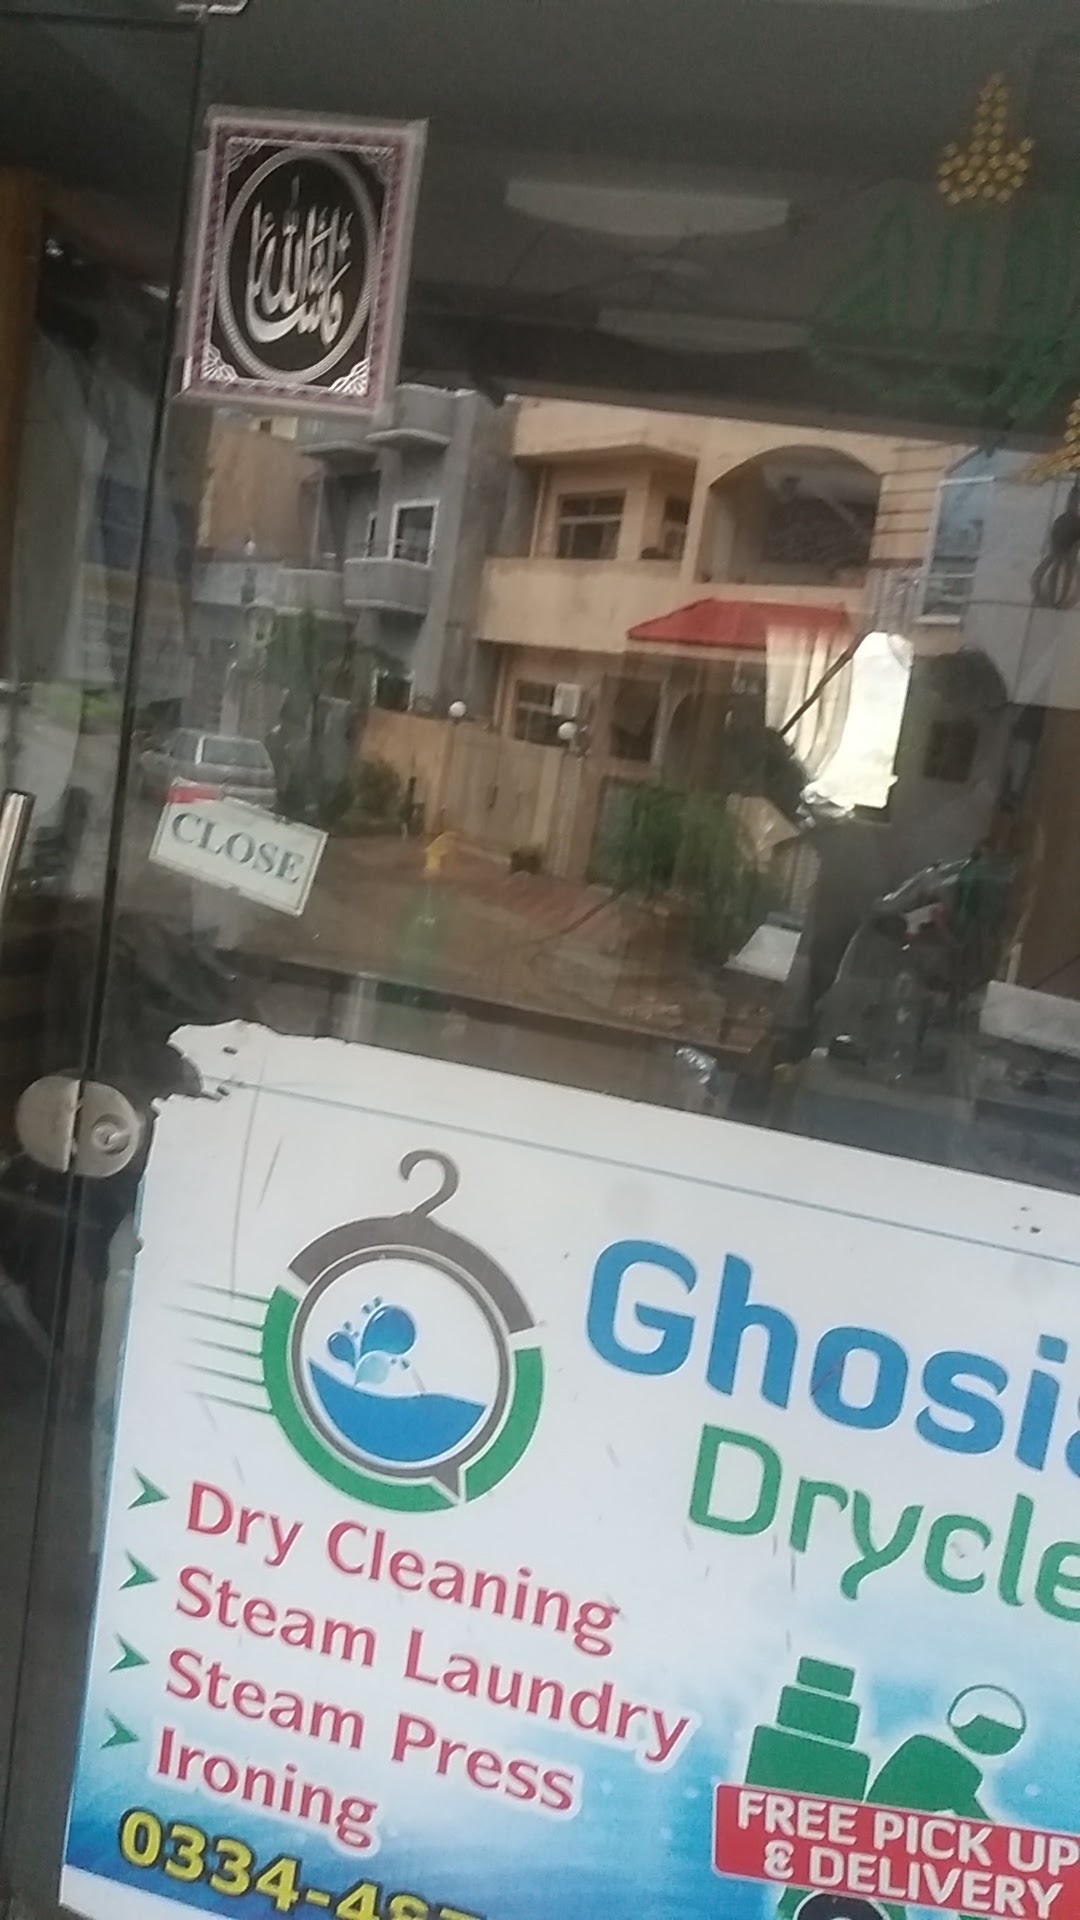 Ghosia Ultra Drycleaners